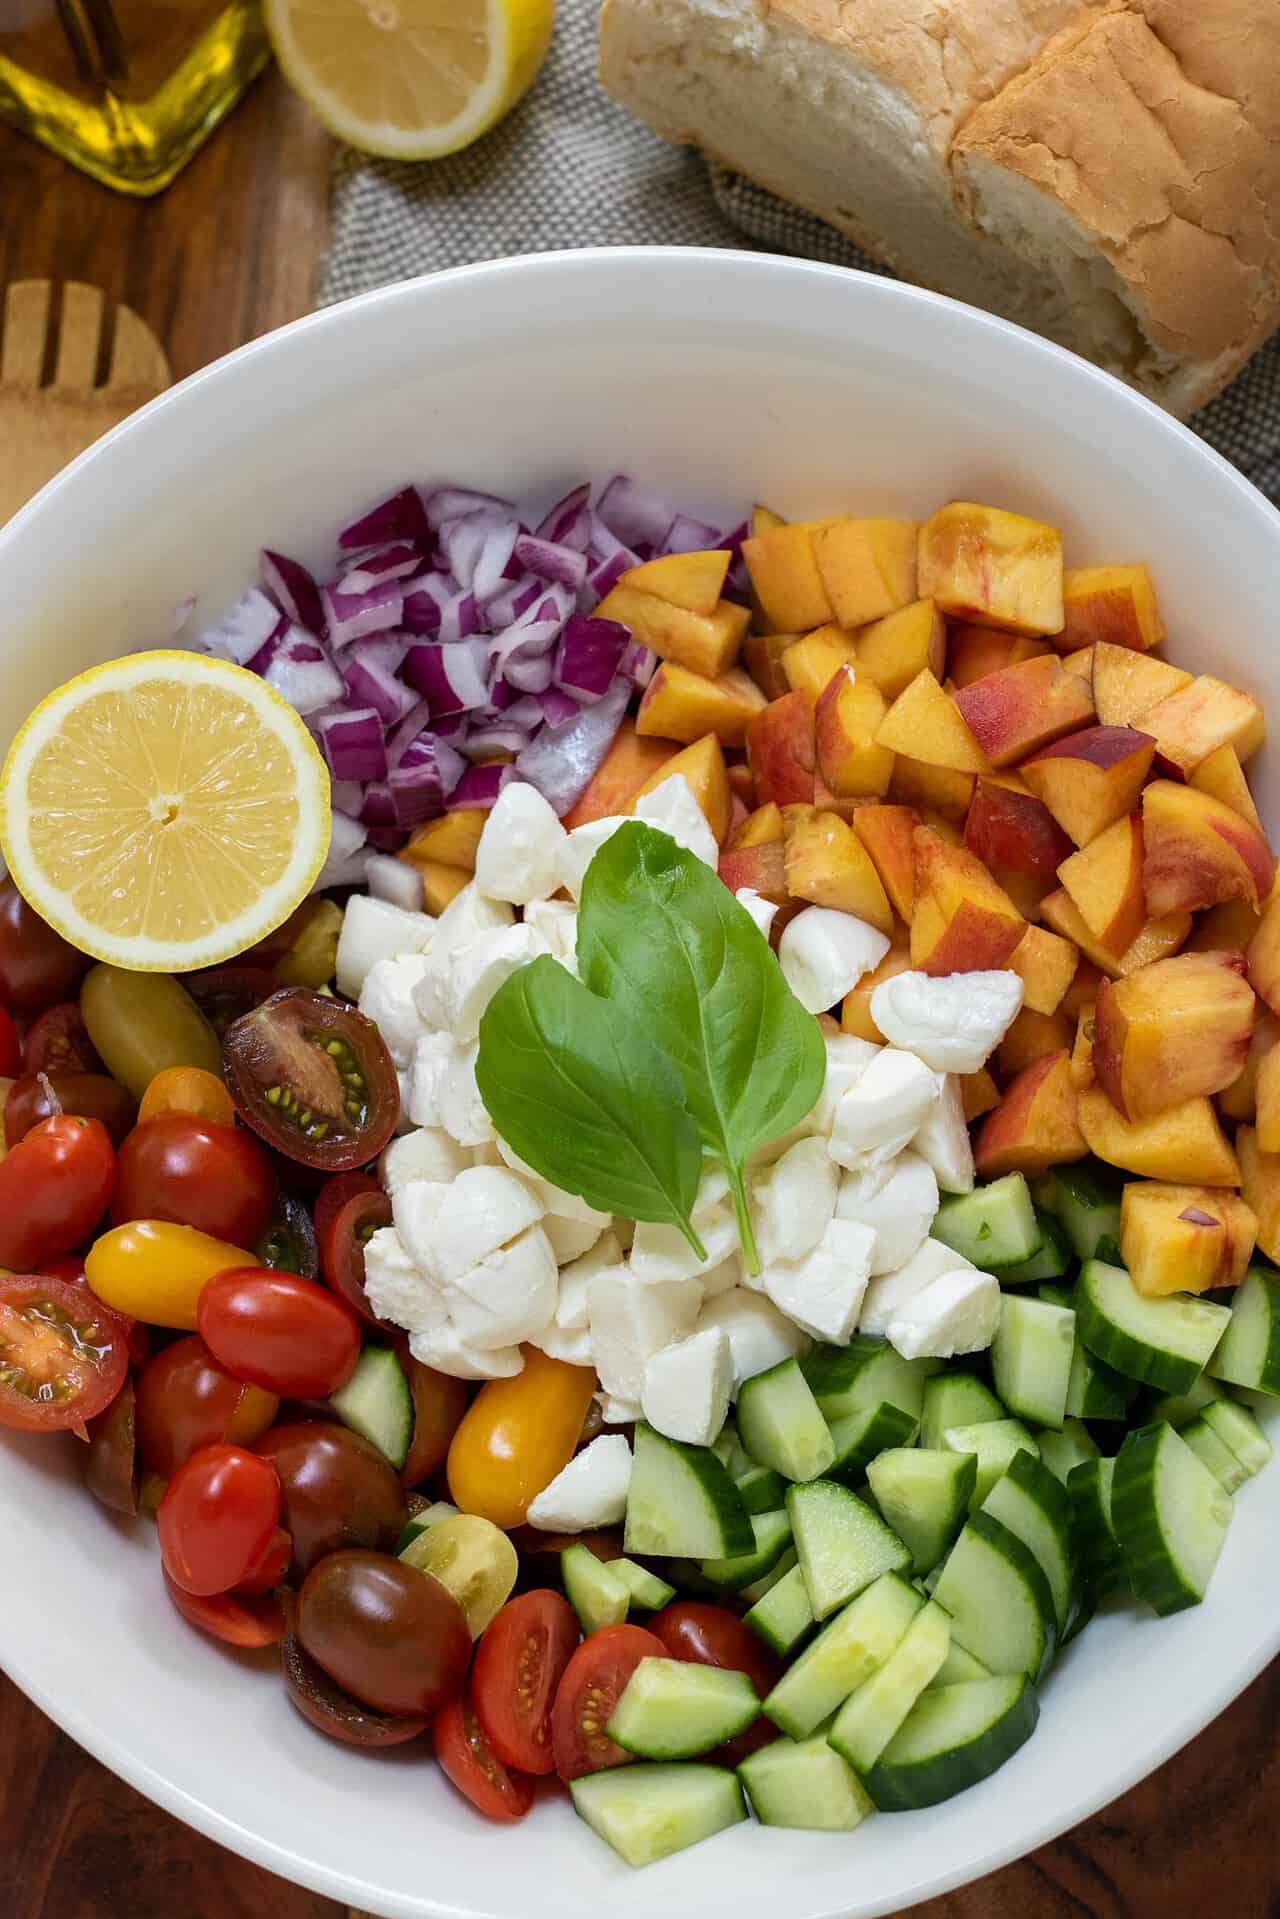 A large white bowl with halved cherry tomatoes, diced cucumber, red onion, diced peaches, a half a lemon, & fresh basil leaves. There's a loaf of Italian bread in the background with a wooden serving spoon and olive oil